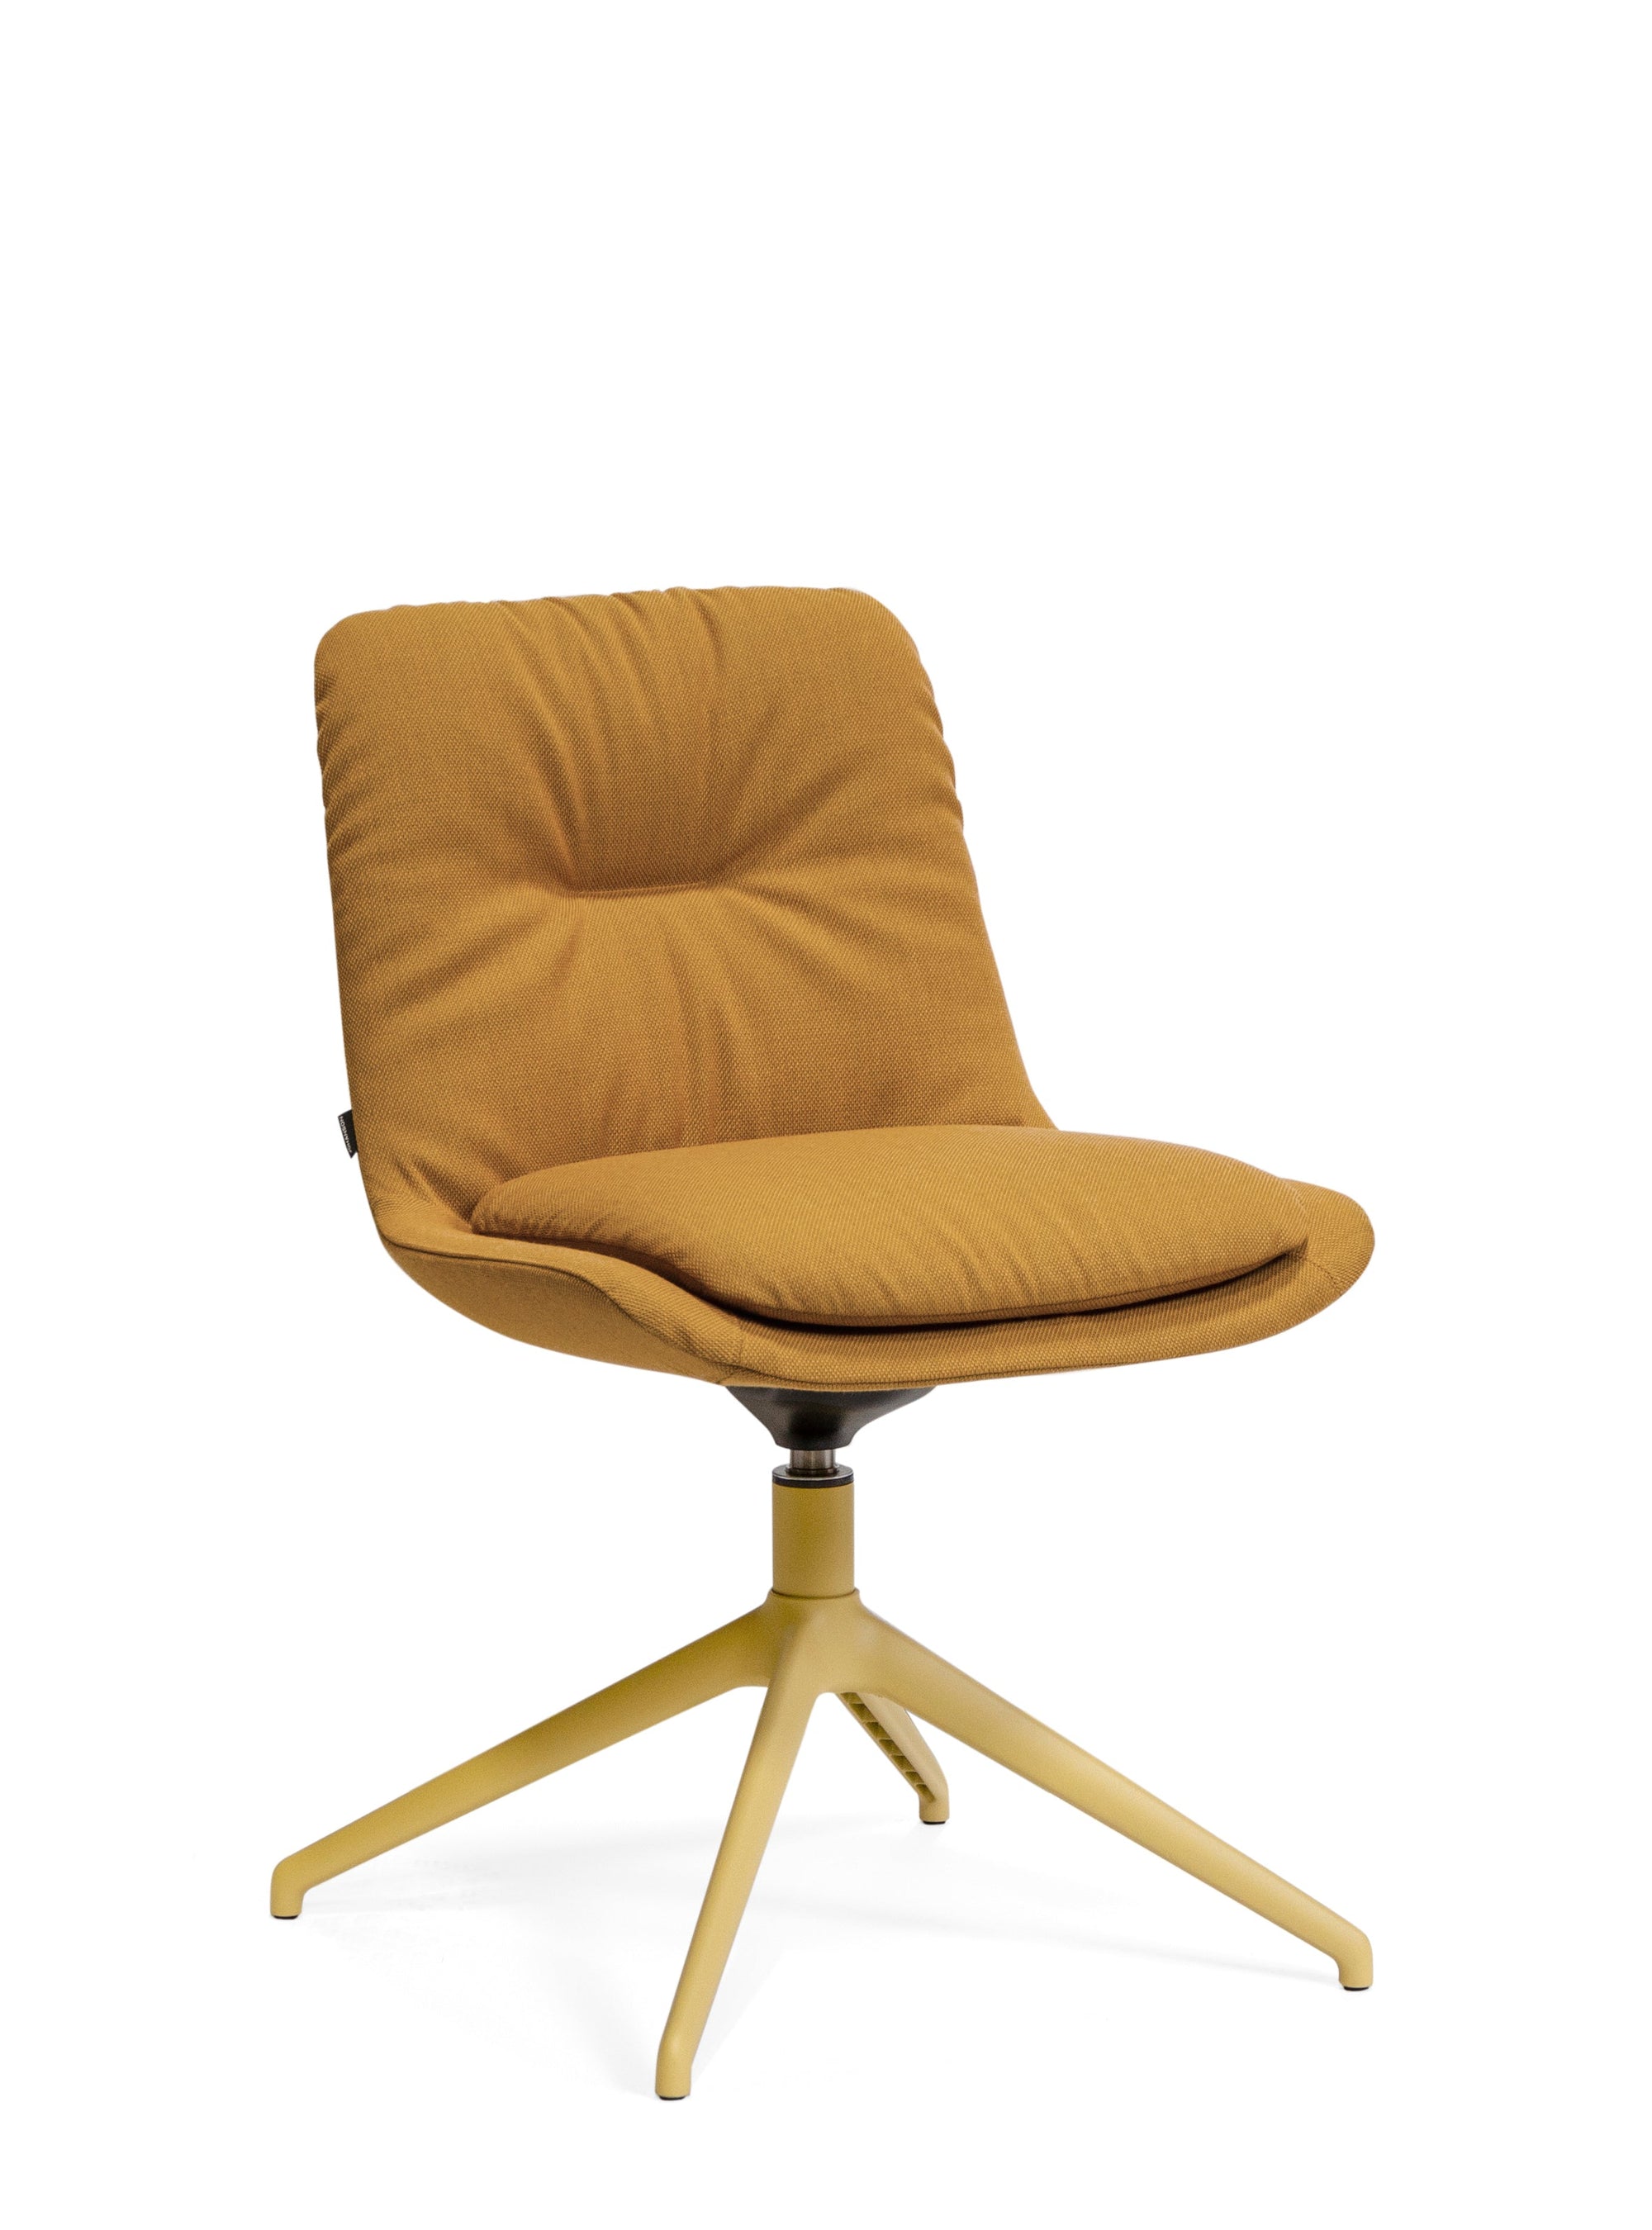 Opus Low 03-46 Lounge Chair-Johanson Design-Contract Furniture Store